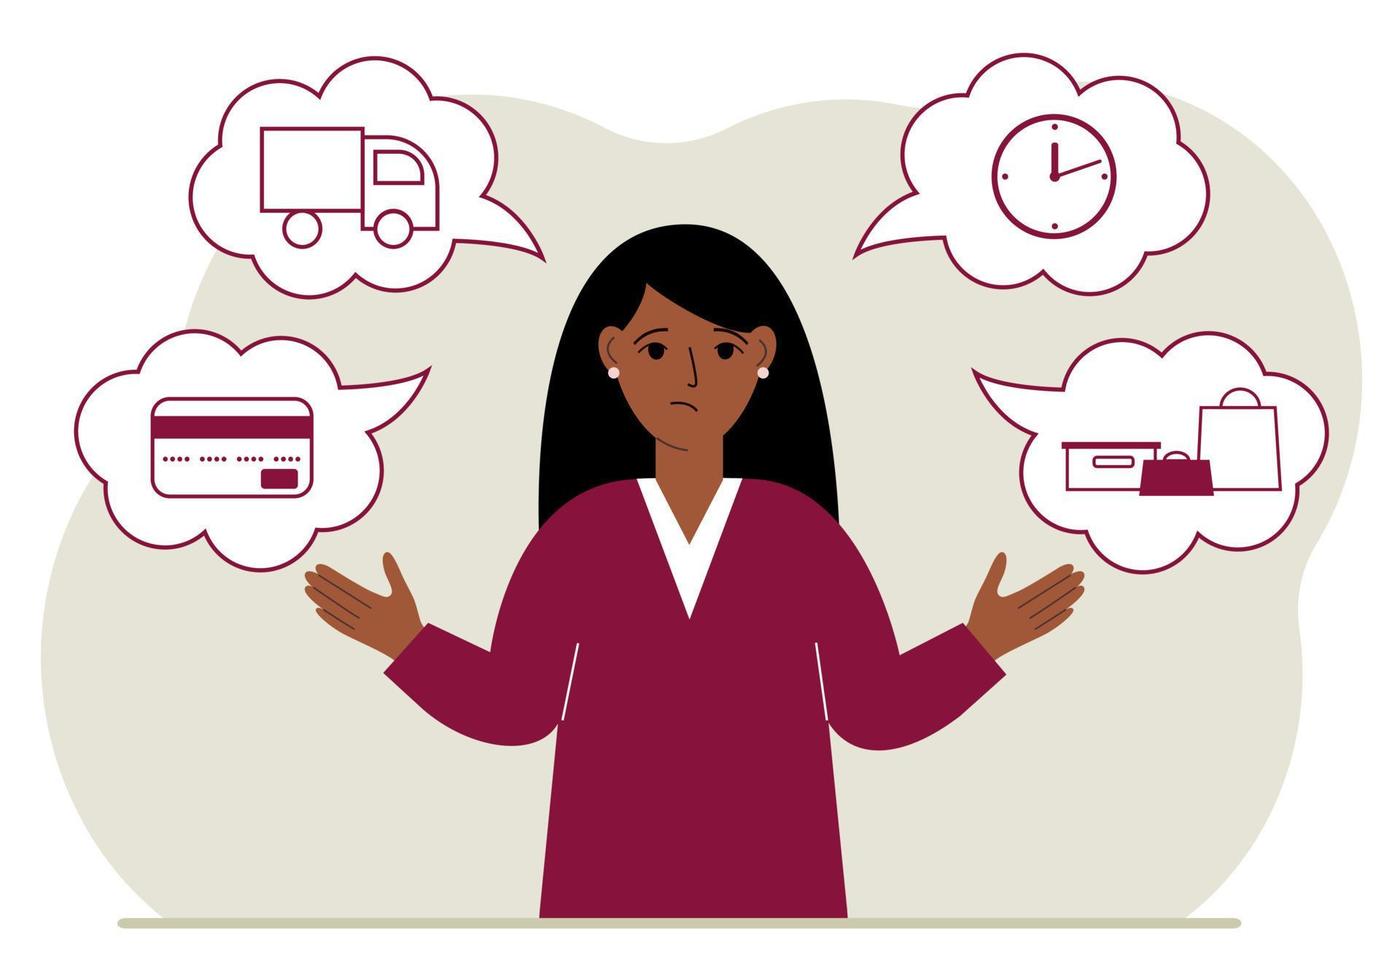 Ordering and delivery process concepts. Sad woman and steps of a delivery order. Payment, delivery car, waiting hours and goods and purchases. Vector flat illustration